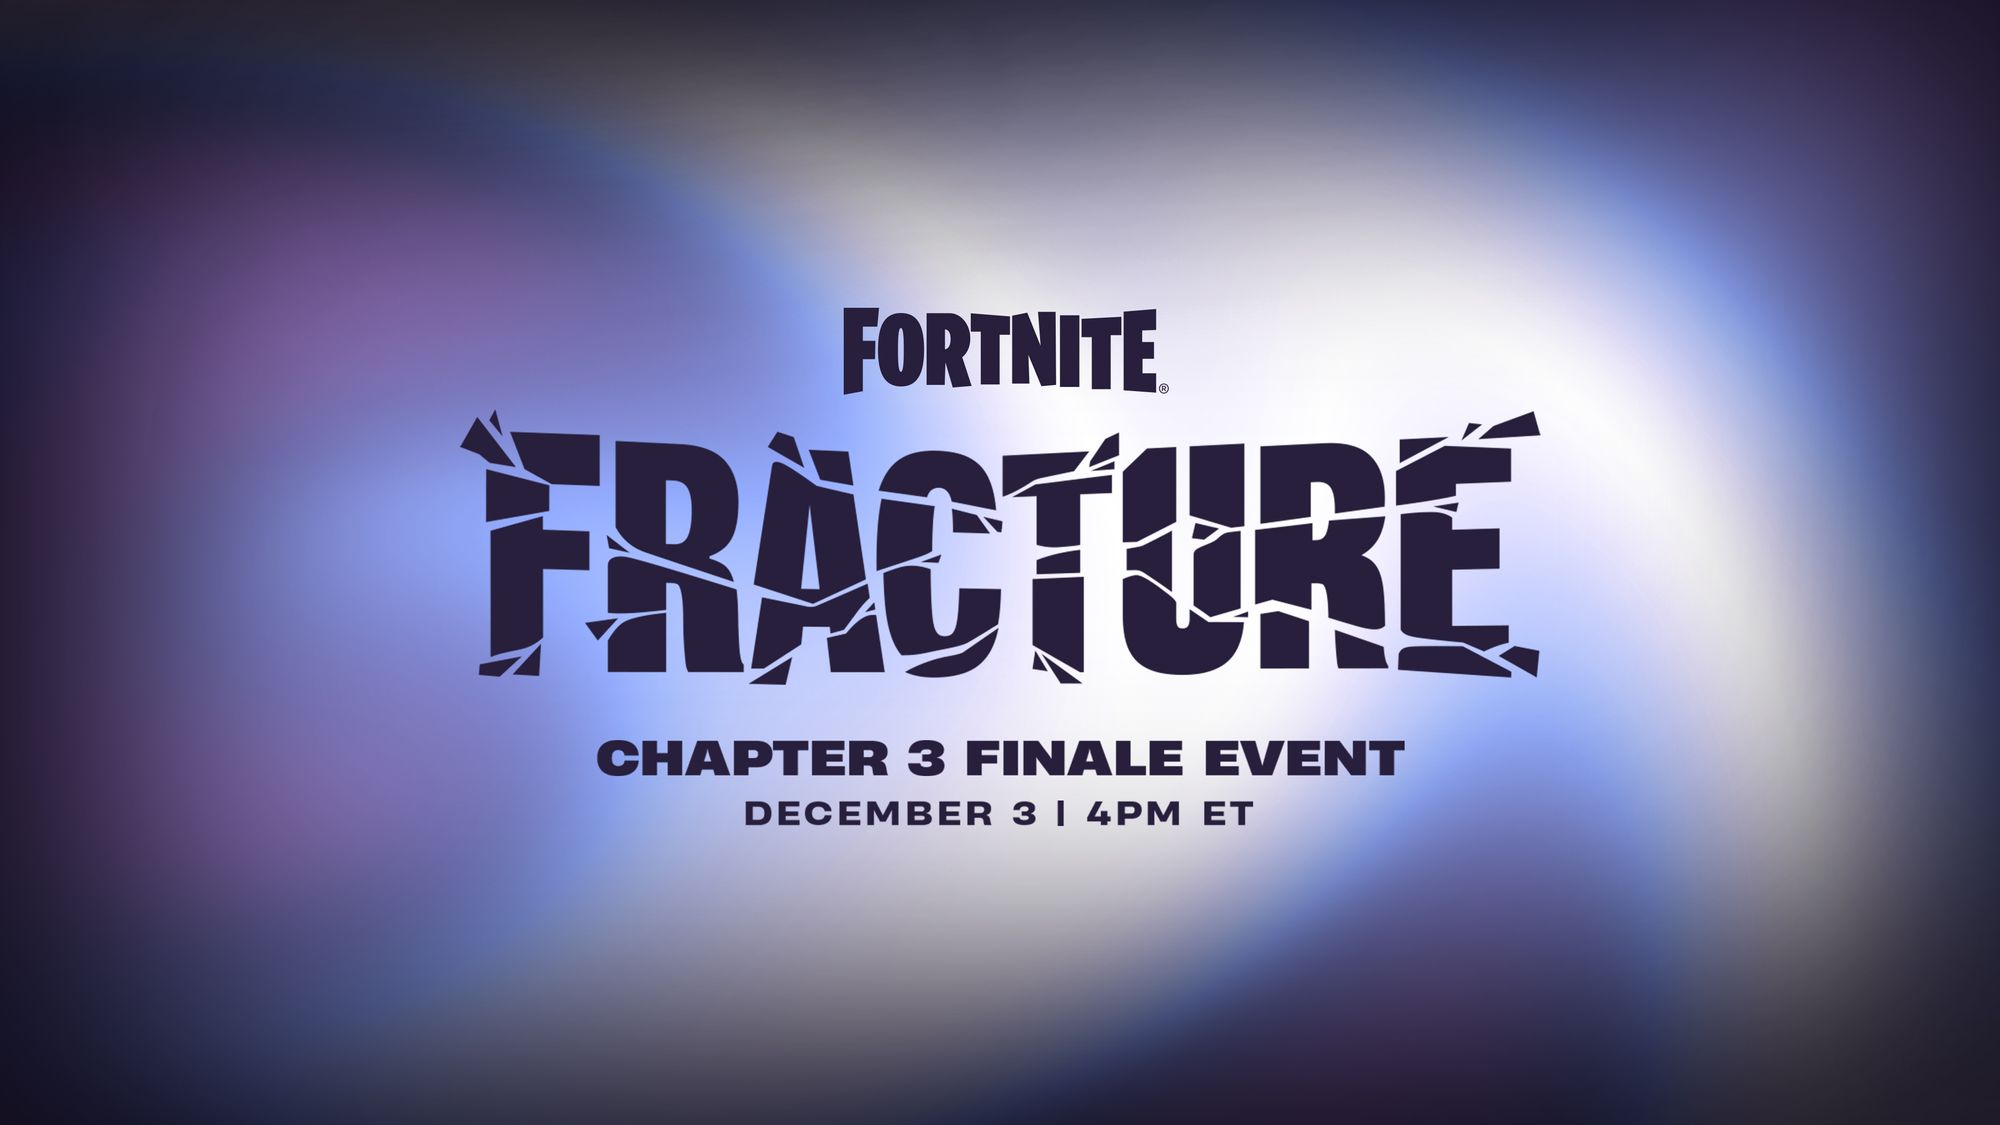 Fortnite Chapter 4 release date & "Fracture" Finale event confirmed